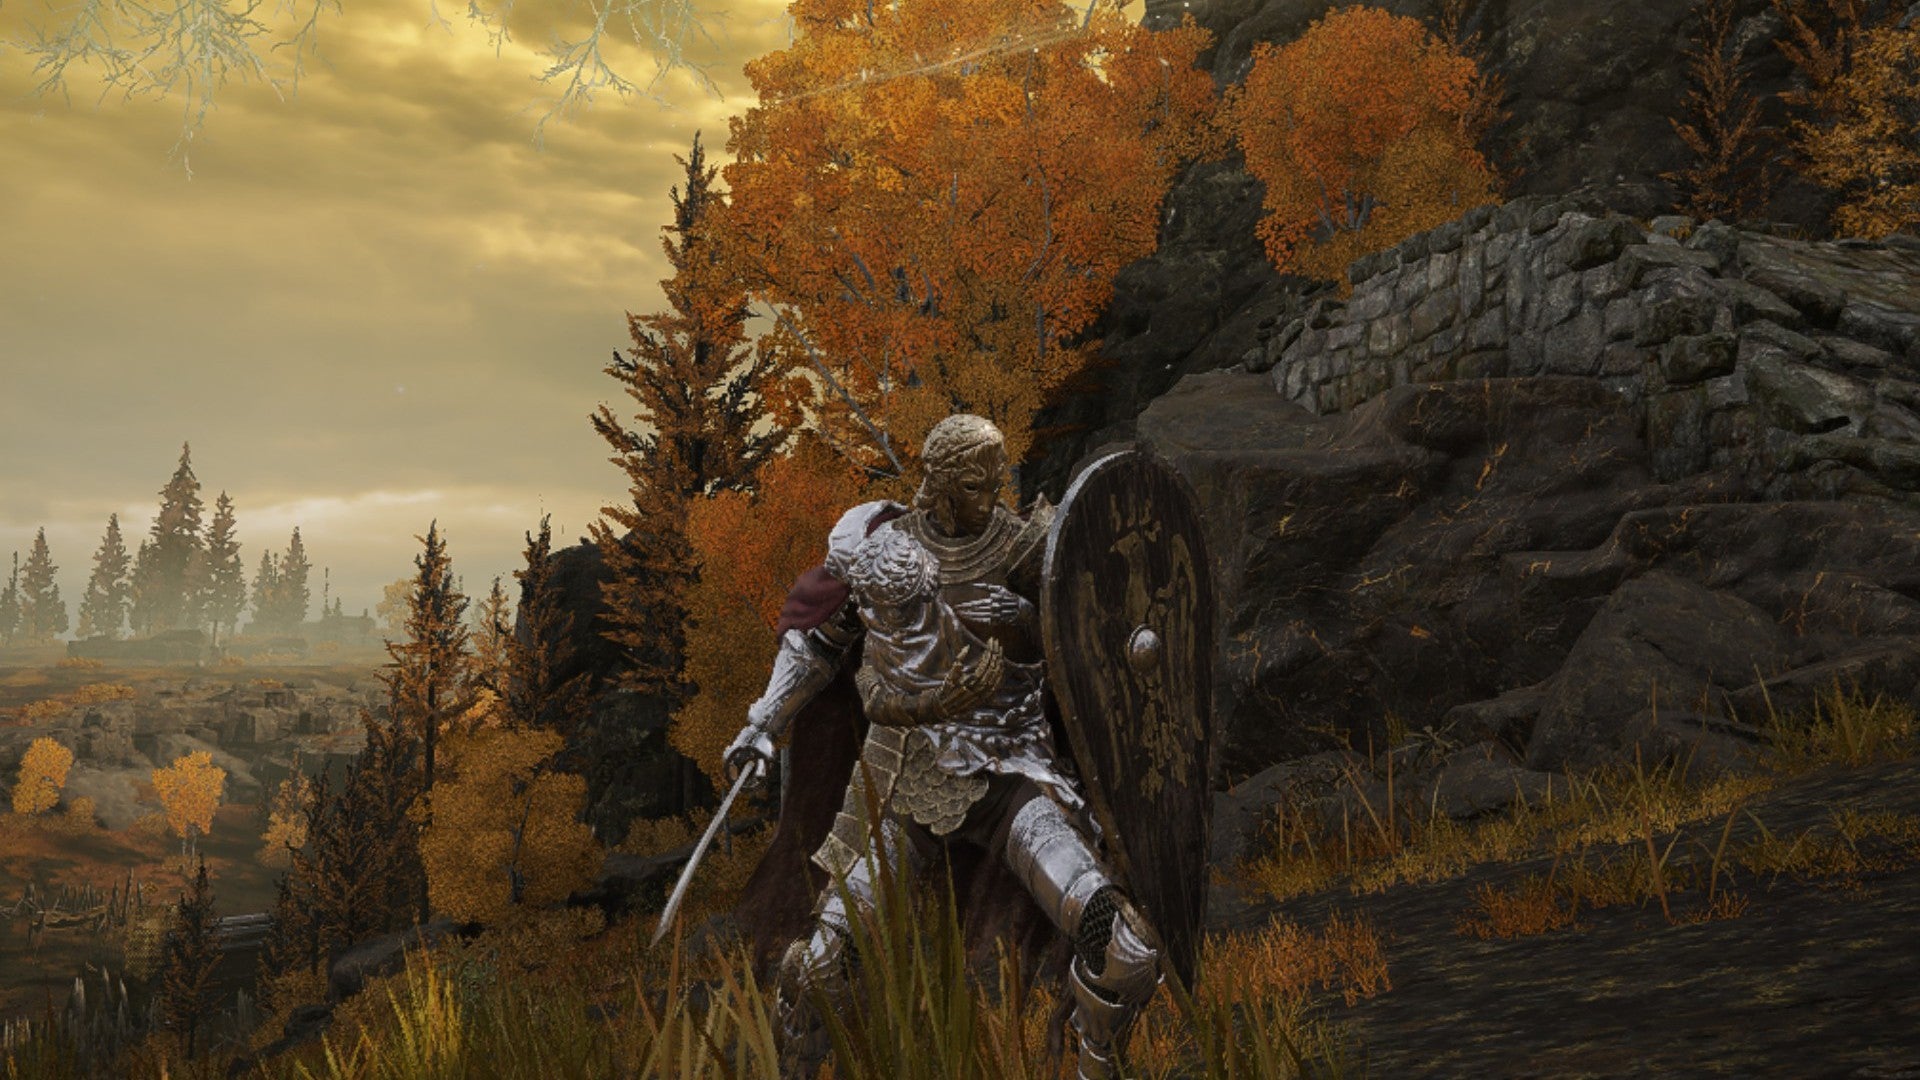 Elden Ring player wielding a katana and a tower shield on the erdtree gazing hill